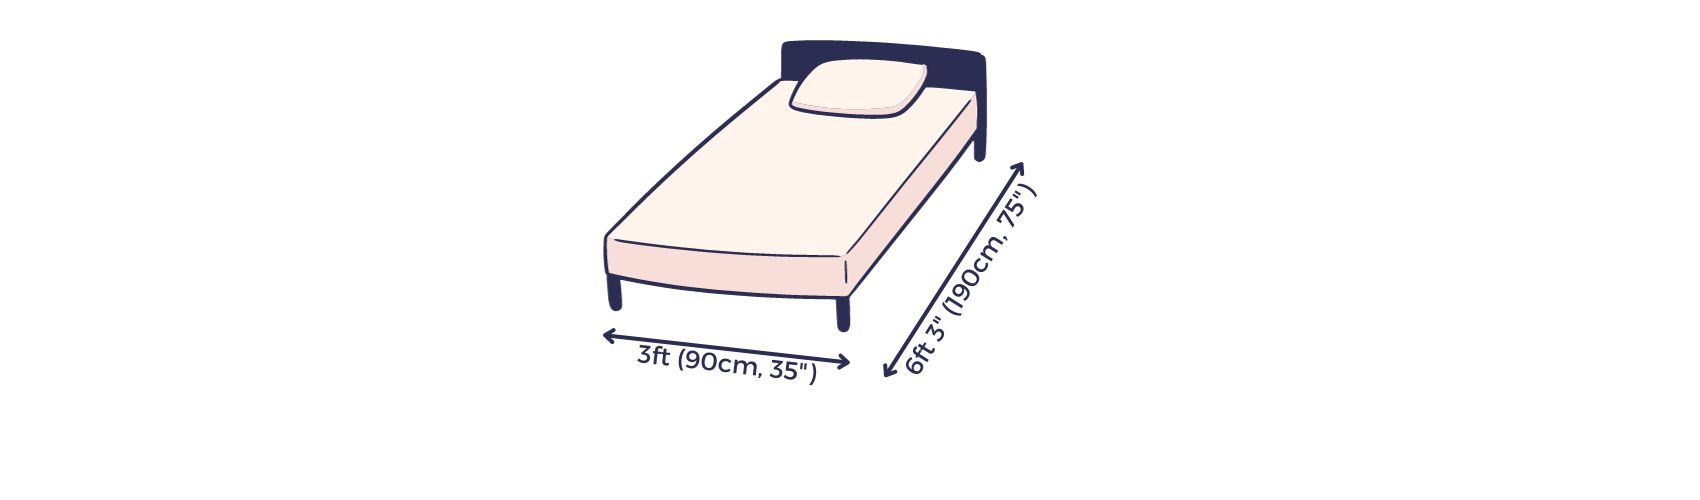 Single bed size